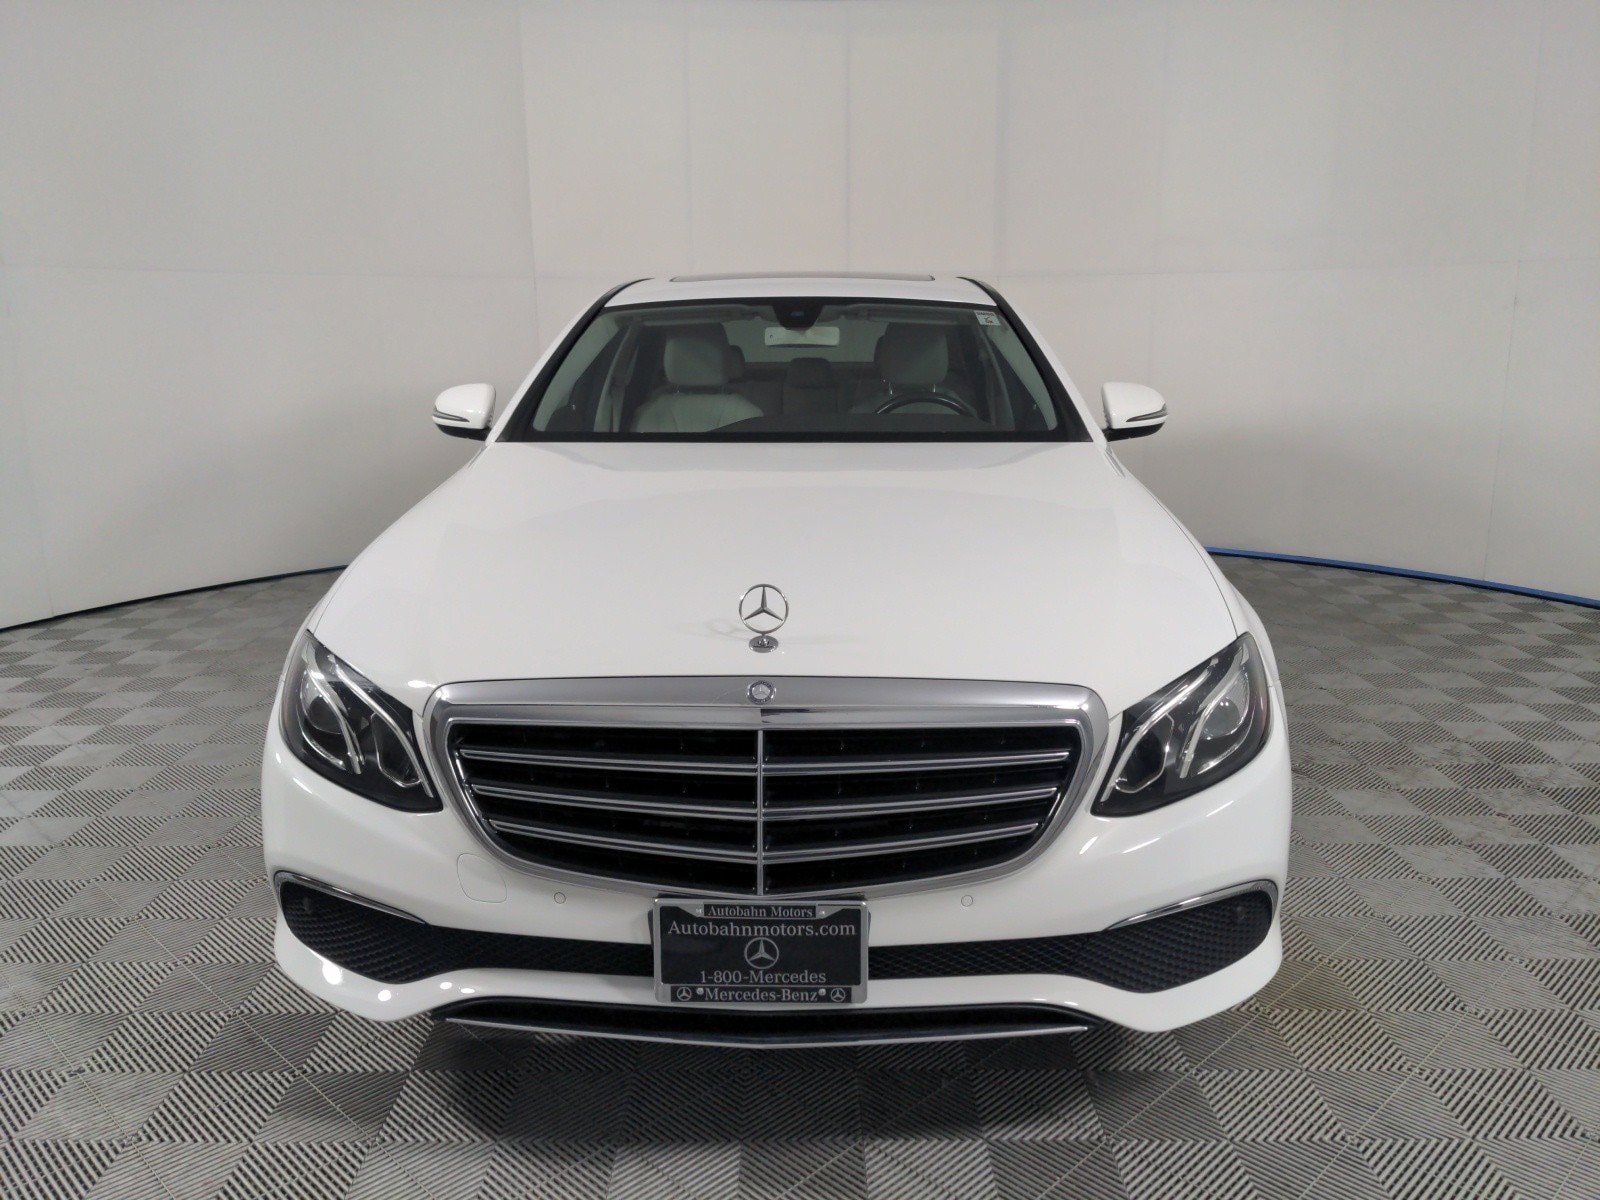 Used 2017 Mercedes-Benz E-Class E300 with VIN WDDZF4JB7HA094032 for sale in Belmont, CA